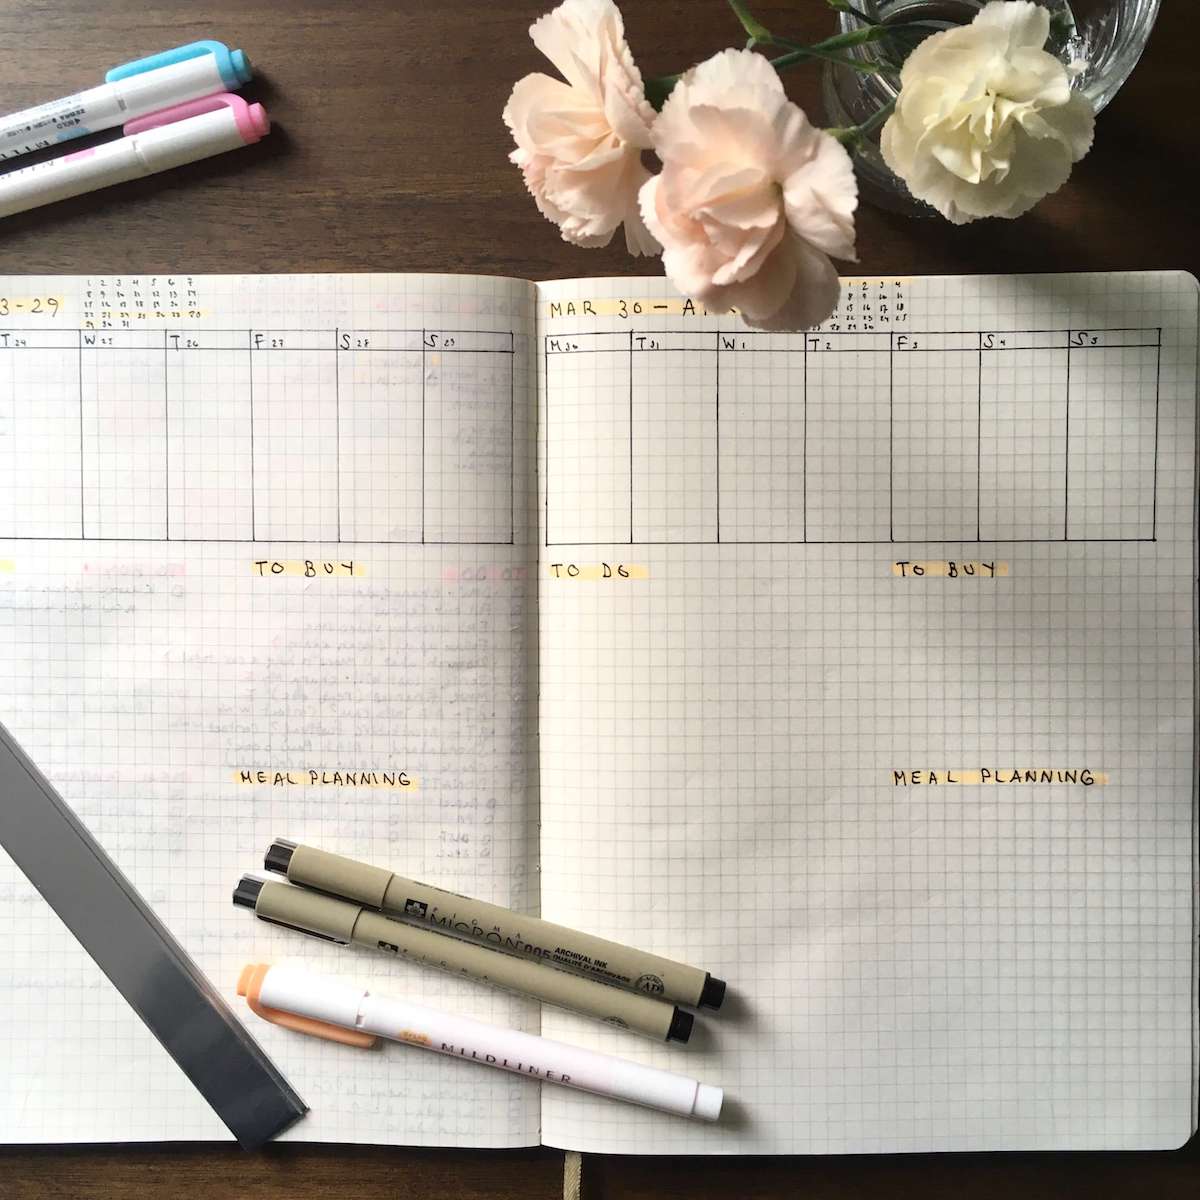 A bullet journal with a weekly view open on a desk. There is a small jar of flowers and pens.